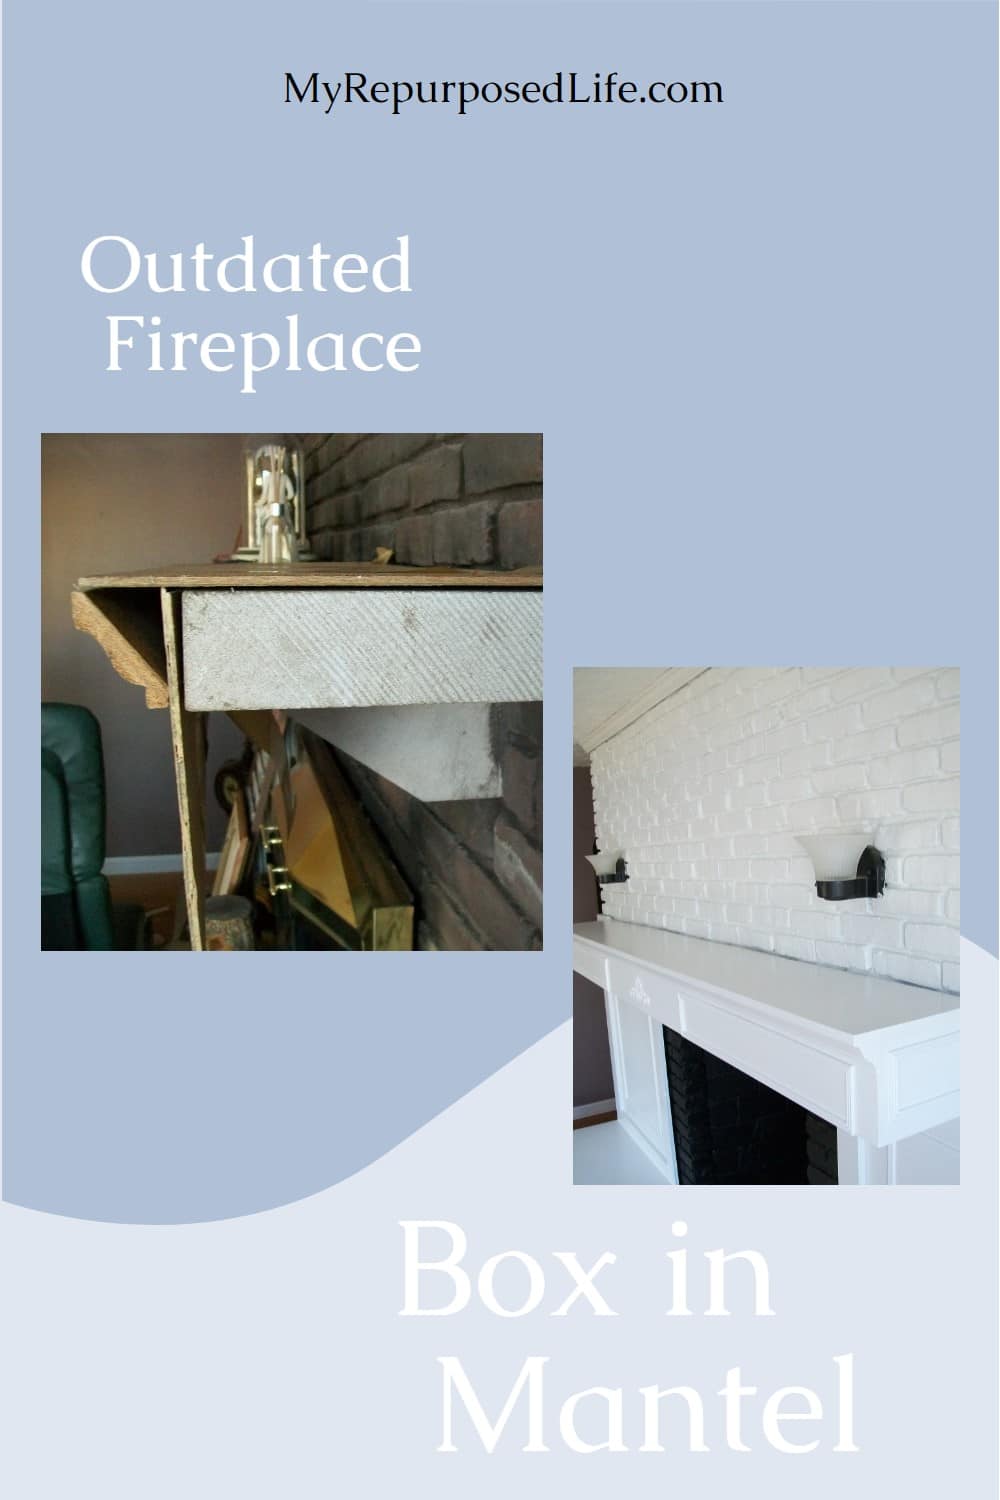 How to update an old, outdated fireplace by encasing the mantel with plywood and molding. Add paint, change up the look of the entire room. #MyRepurposedLife #reno #fireplace via @repurposedlife